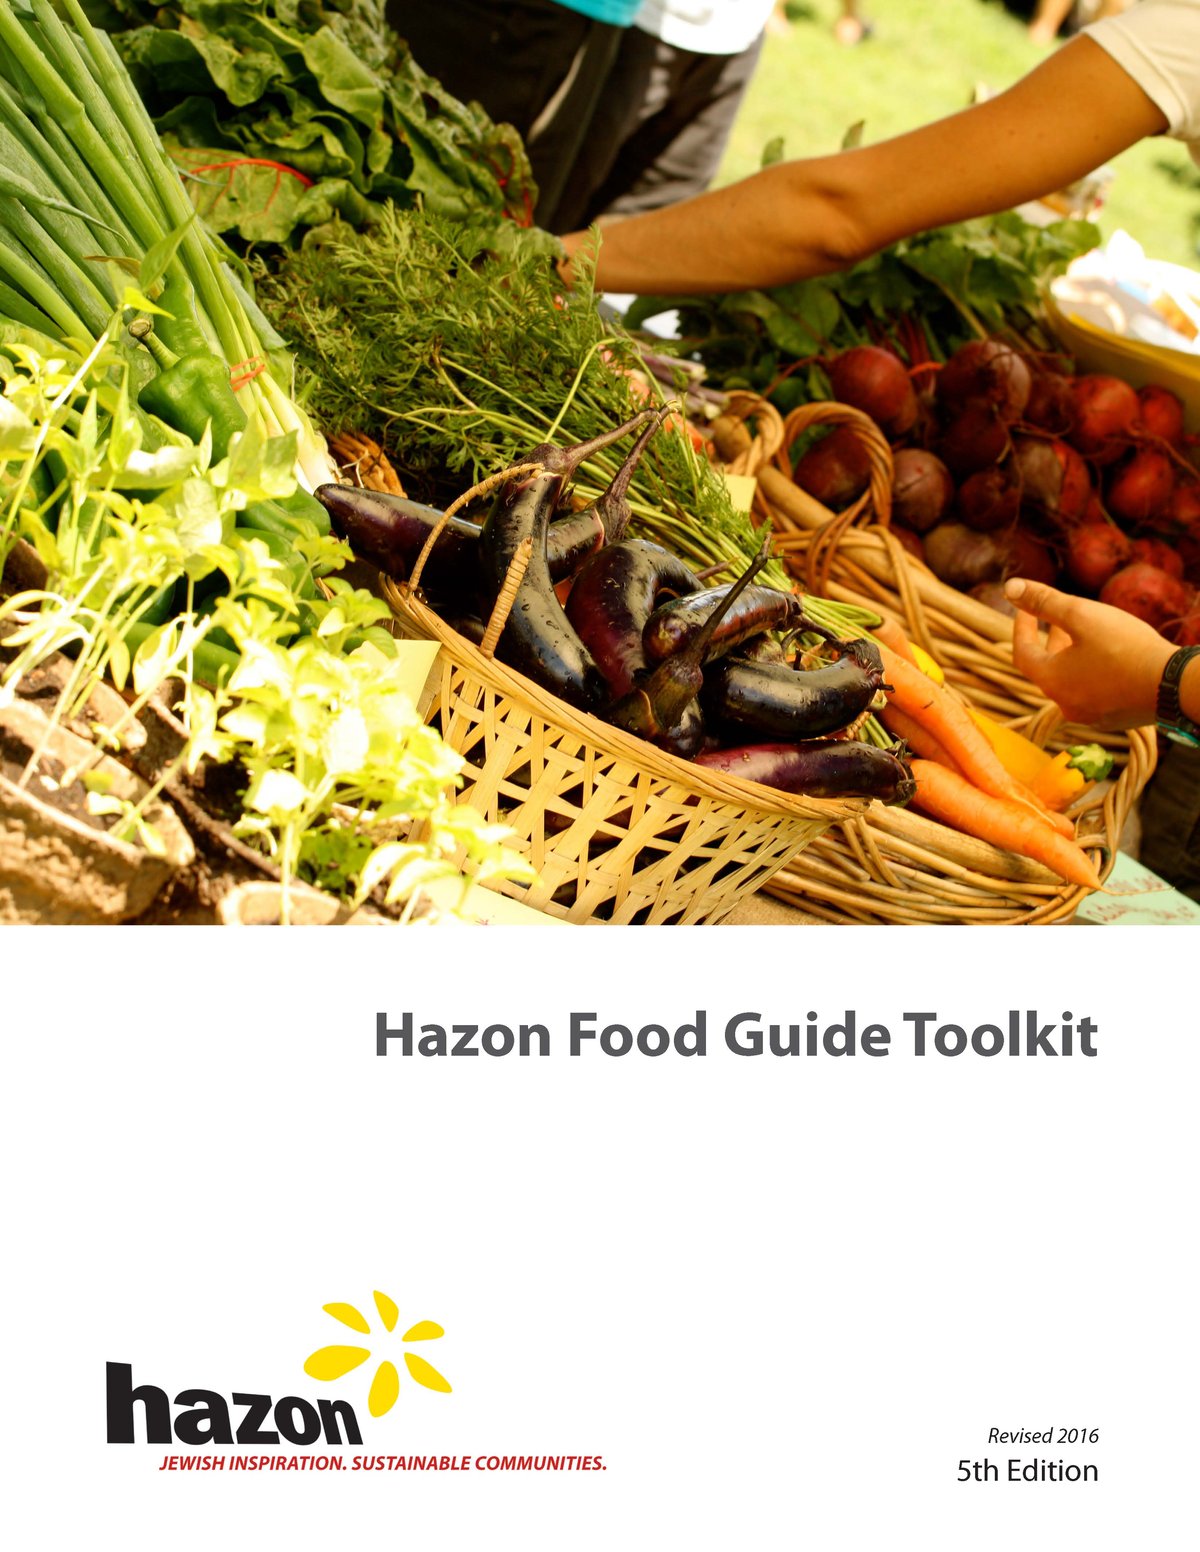 Image of Hazon Food Guide Toolkit